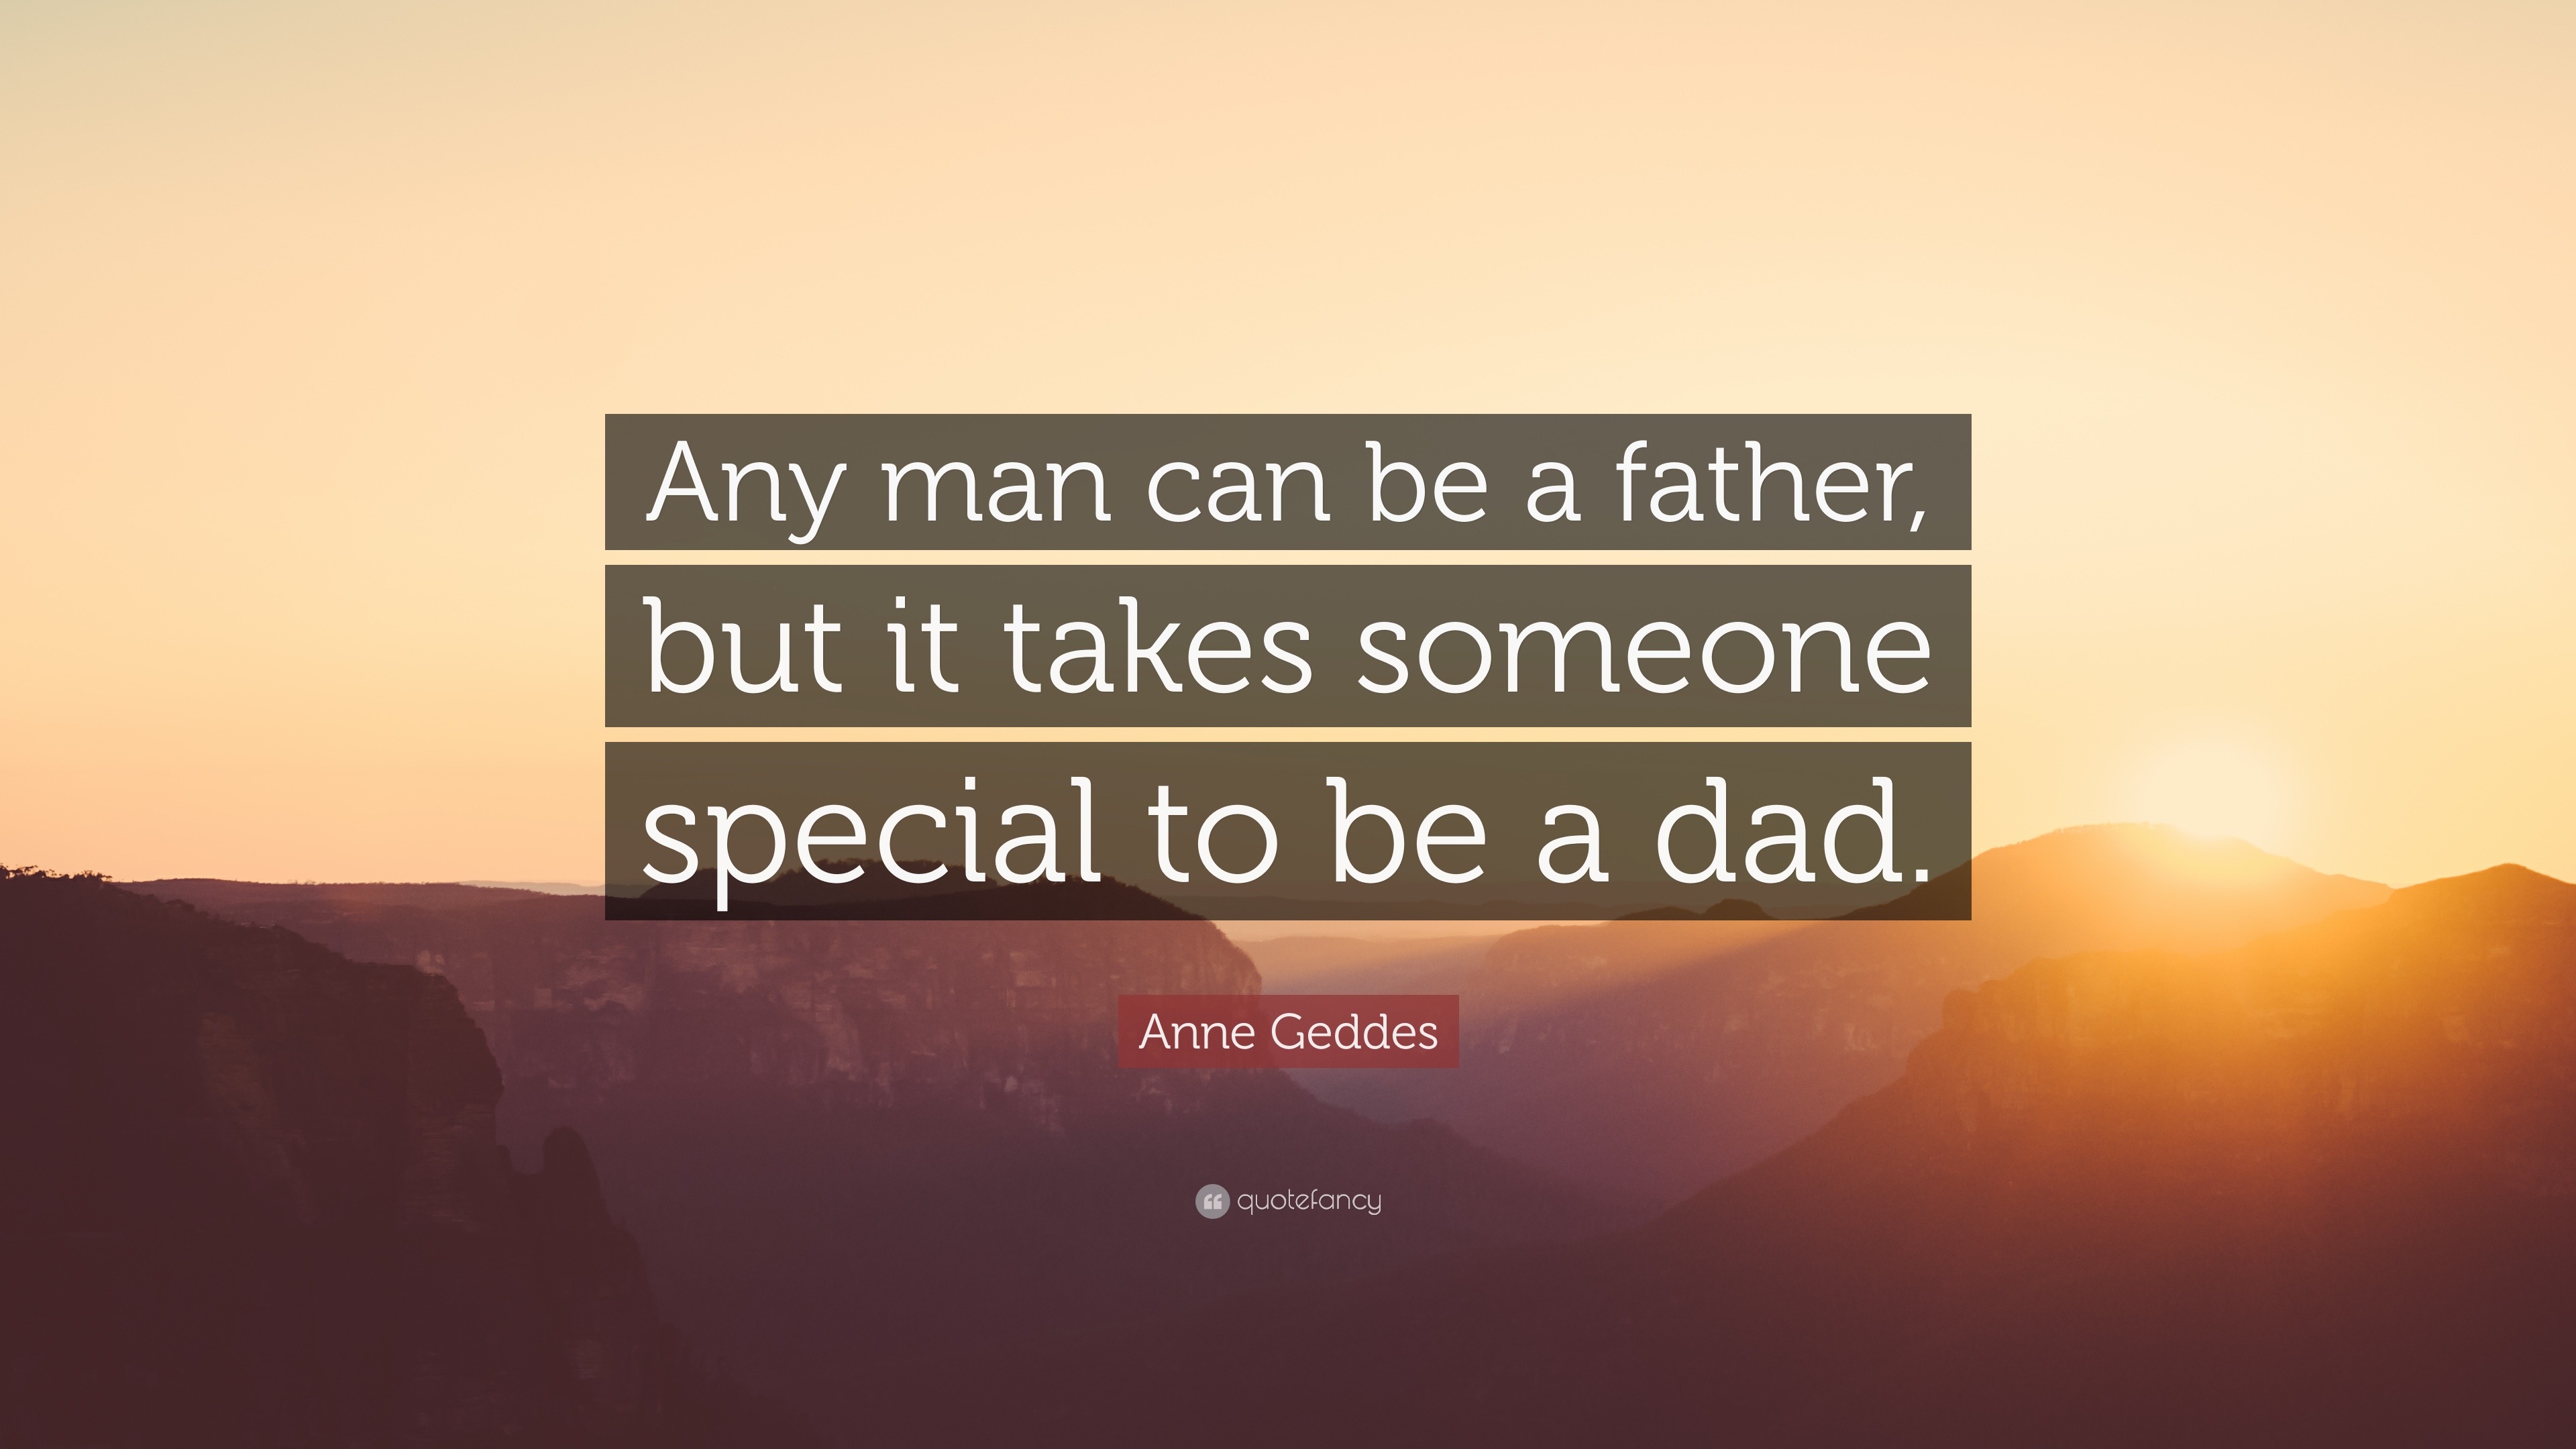 Anne Geddes Quote: “Any man can be a father, but it takes someone